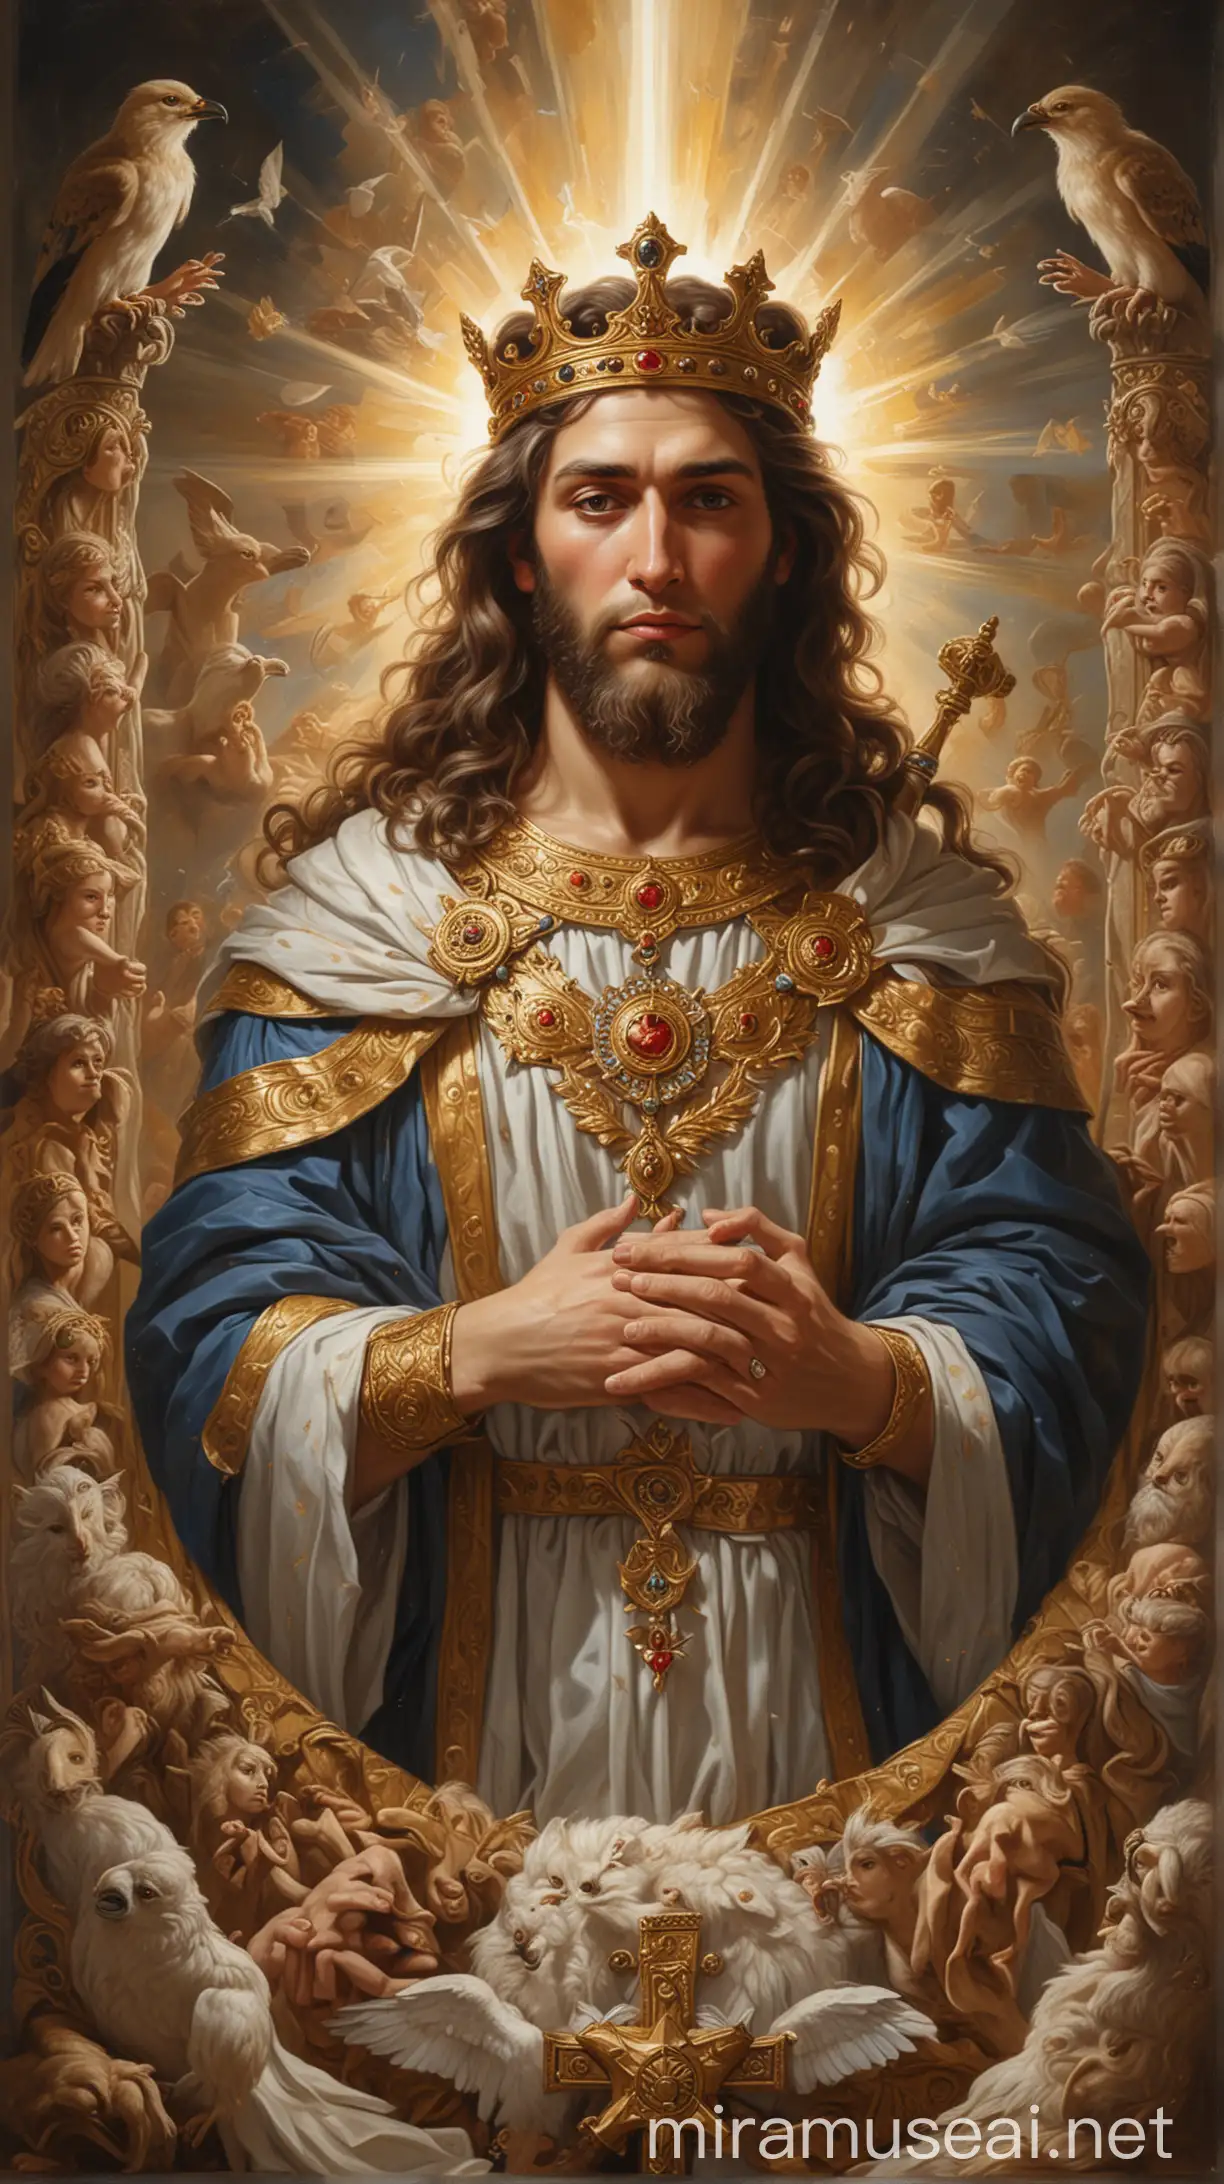 A majestic painting of King David, his face radiating devotion and reverence, surrounded by symbols of love, sacrifice, and honor. The background features a serene, divine light." In ancient Jew